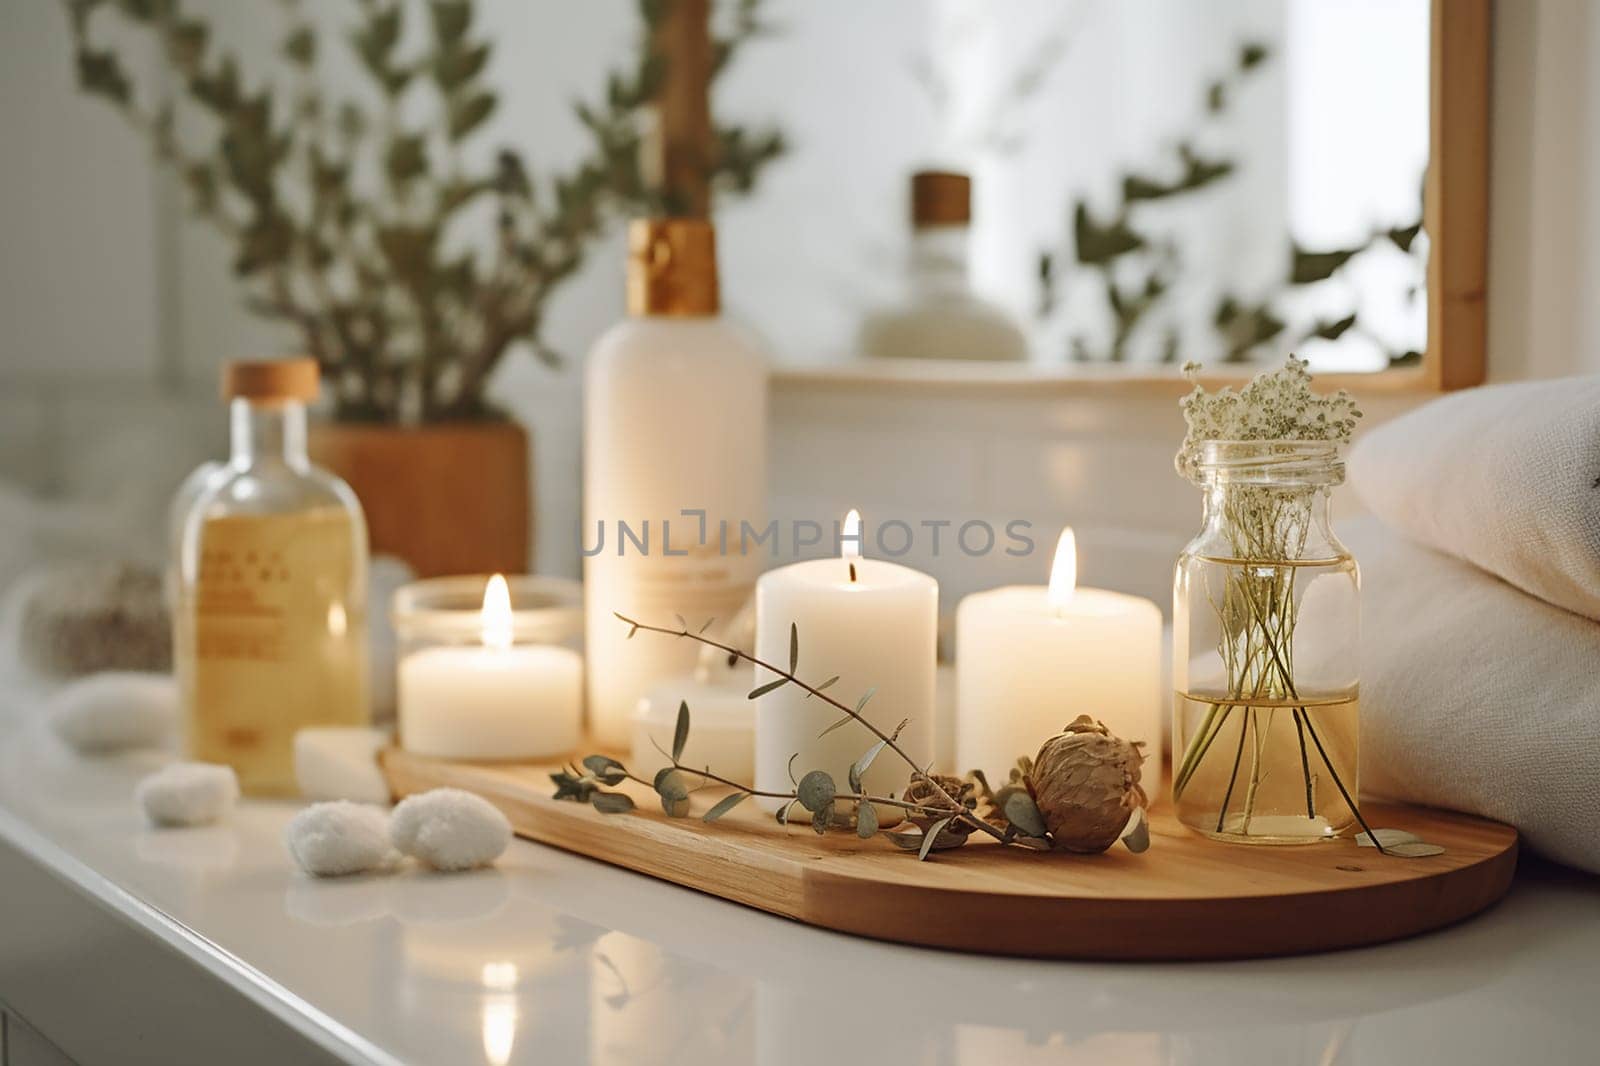 A tranquil setting with candles and bath products for relaxation